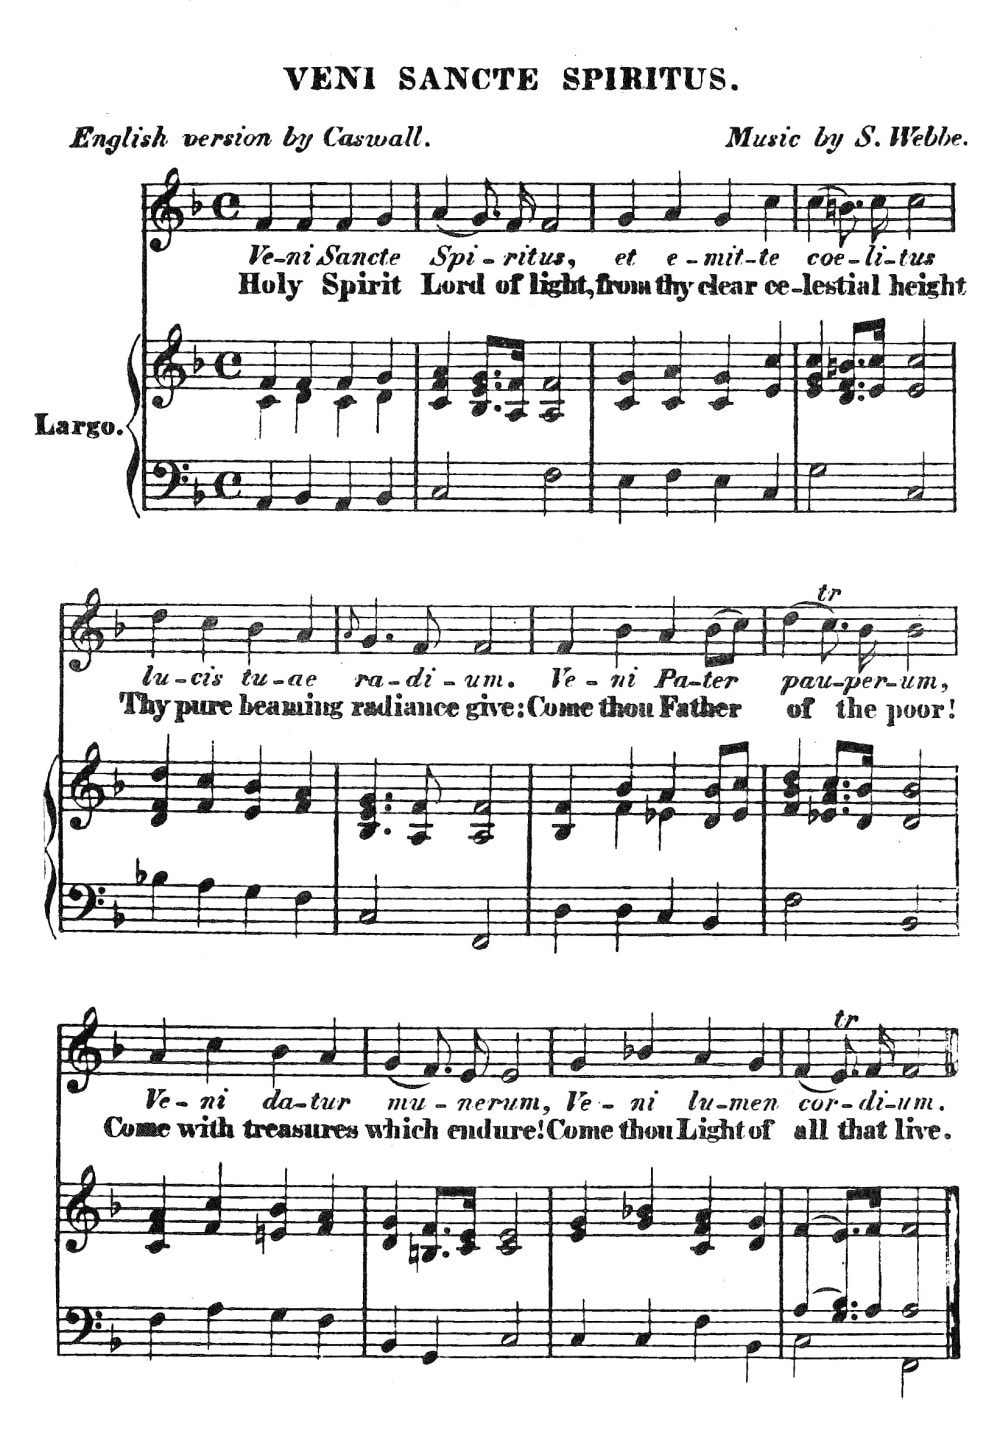 Music punching and printing, example, from Degotardi's The art of printing (1861)